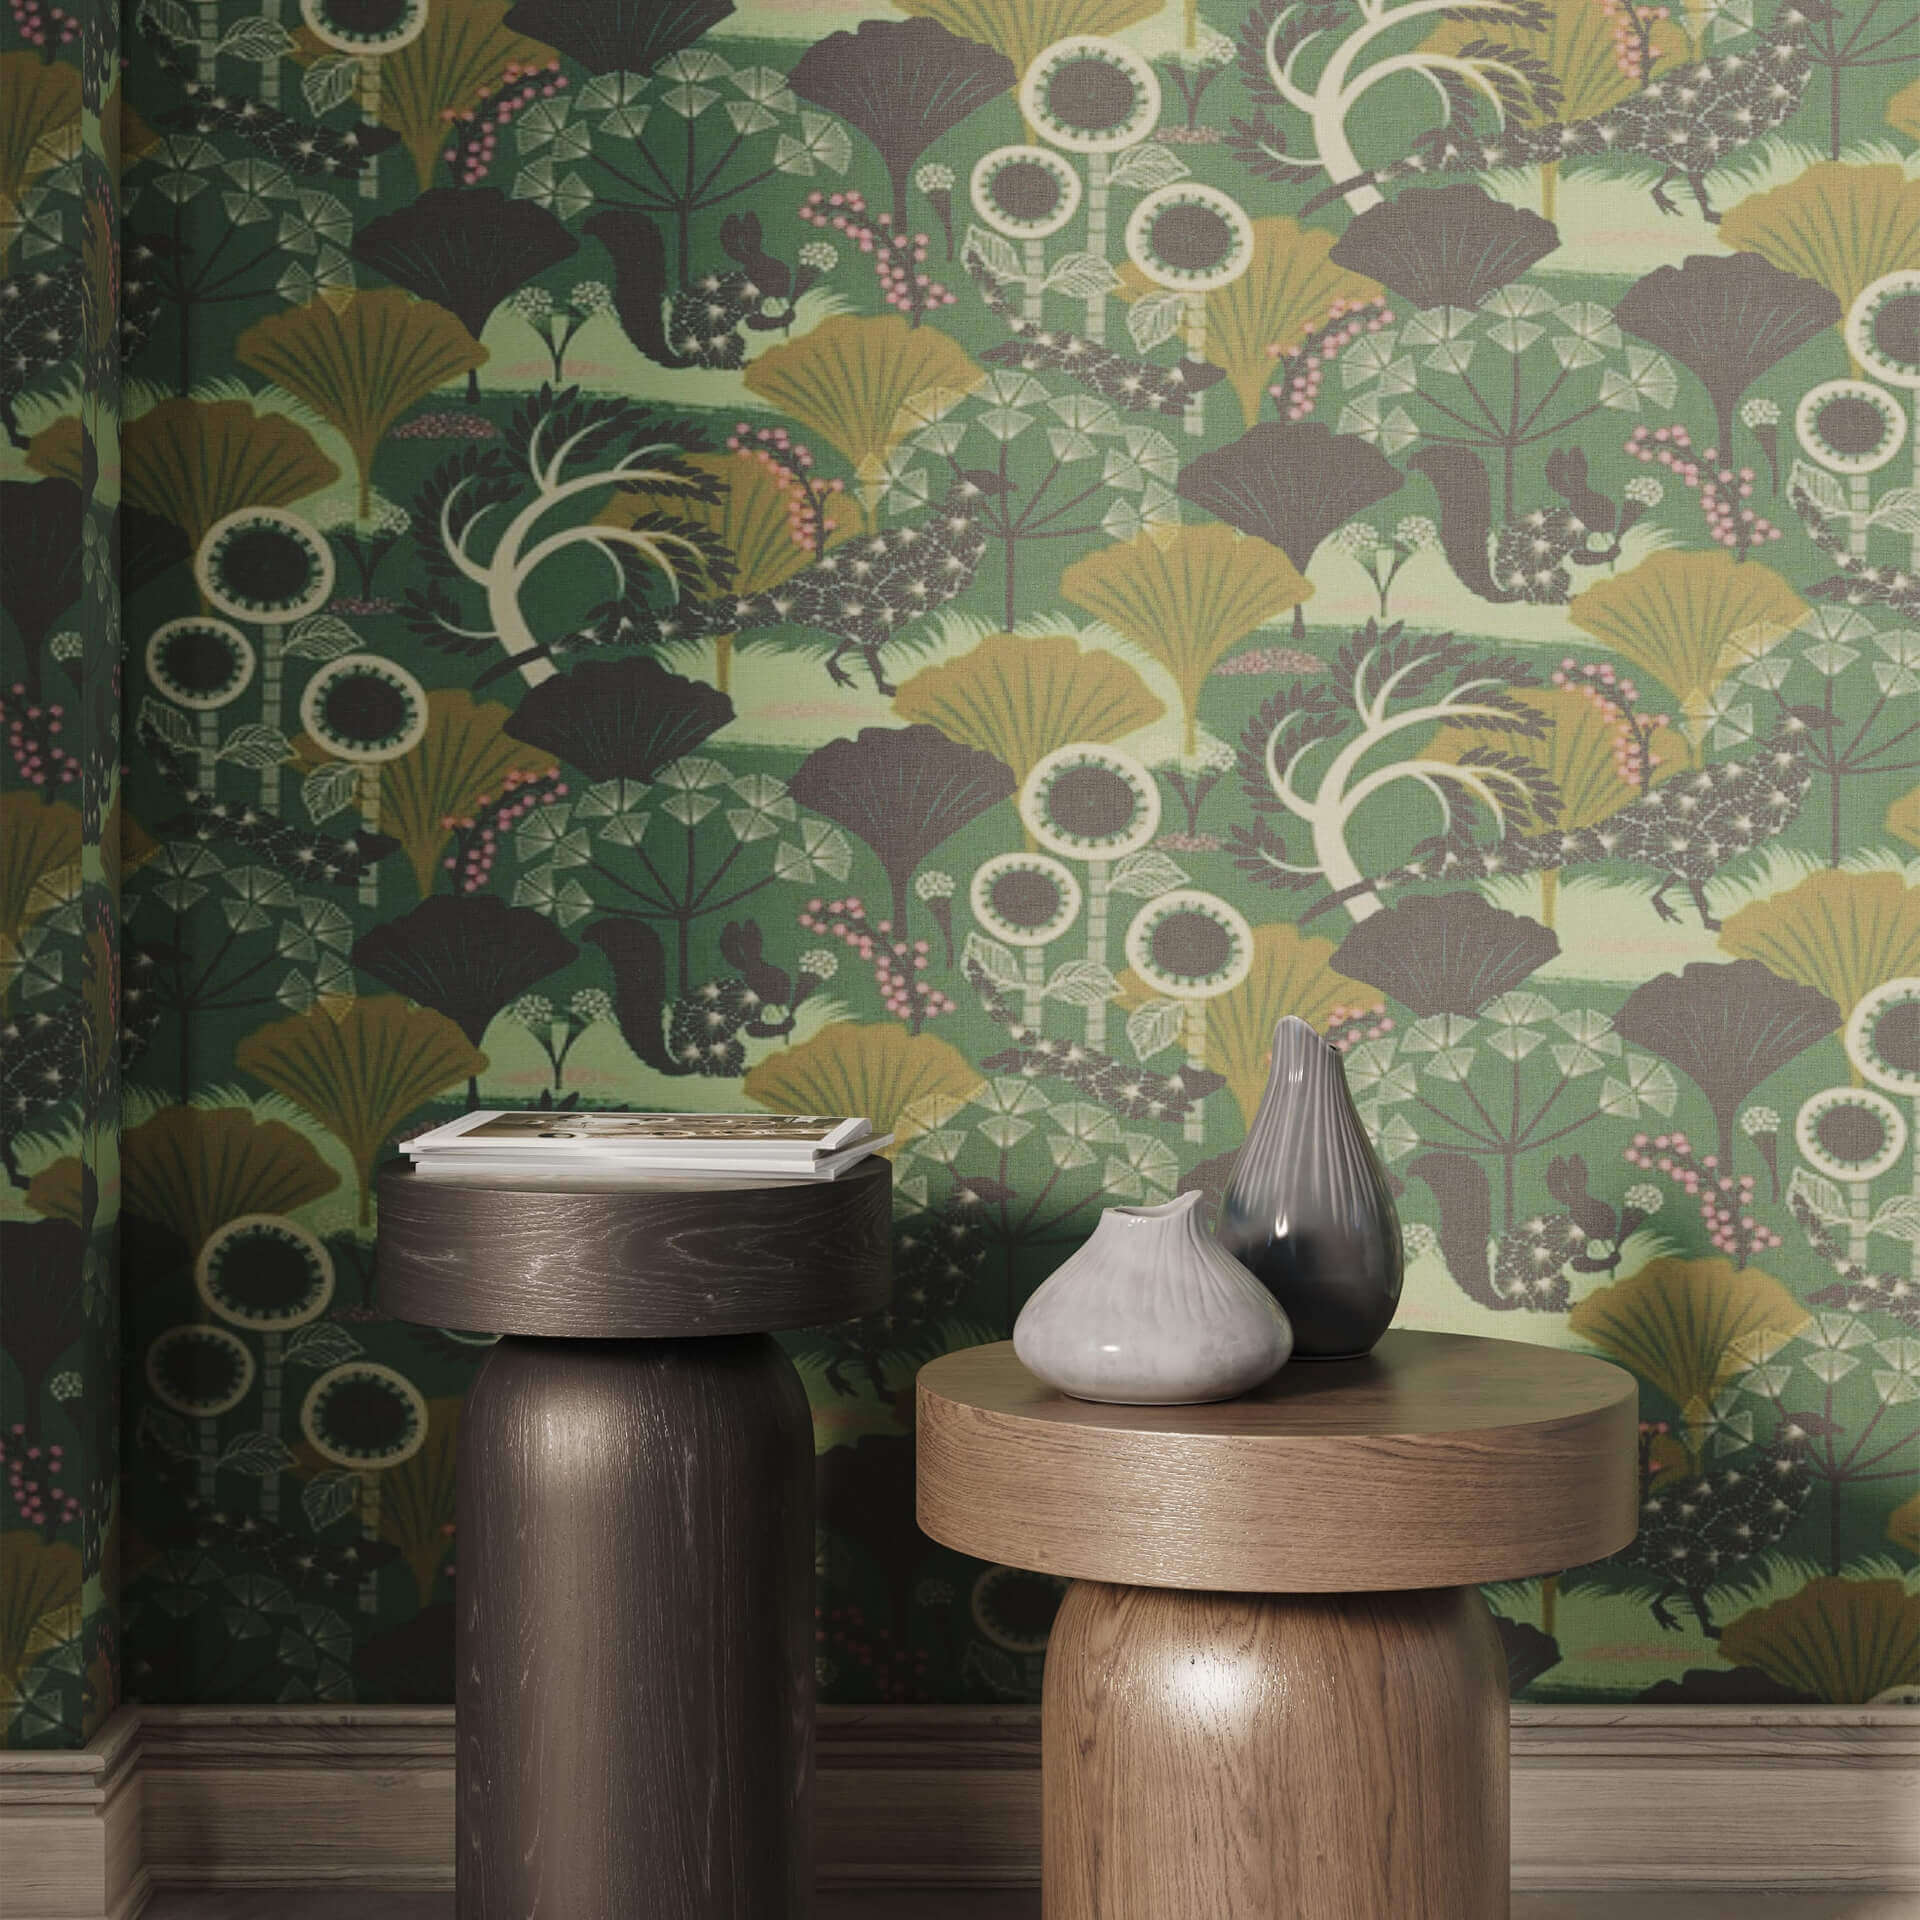 3D Rendering of an Alternative Product Option for Wall Coverings